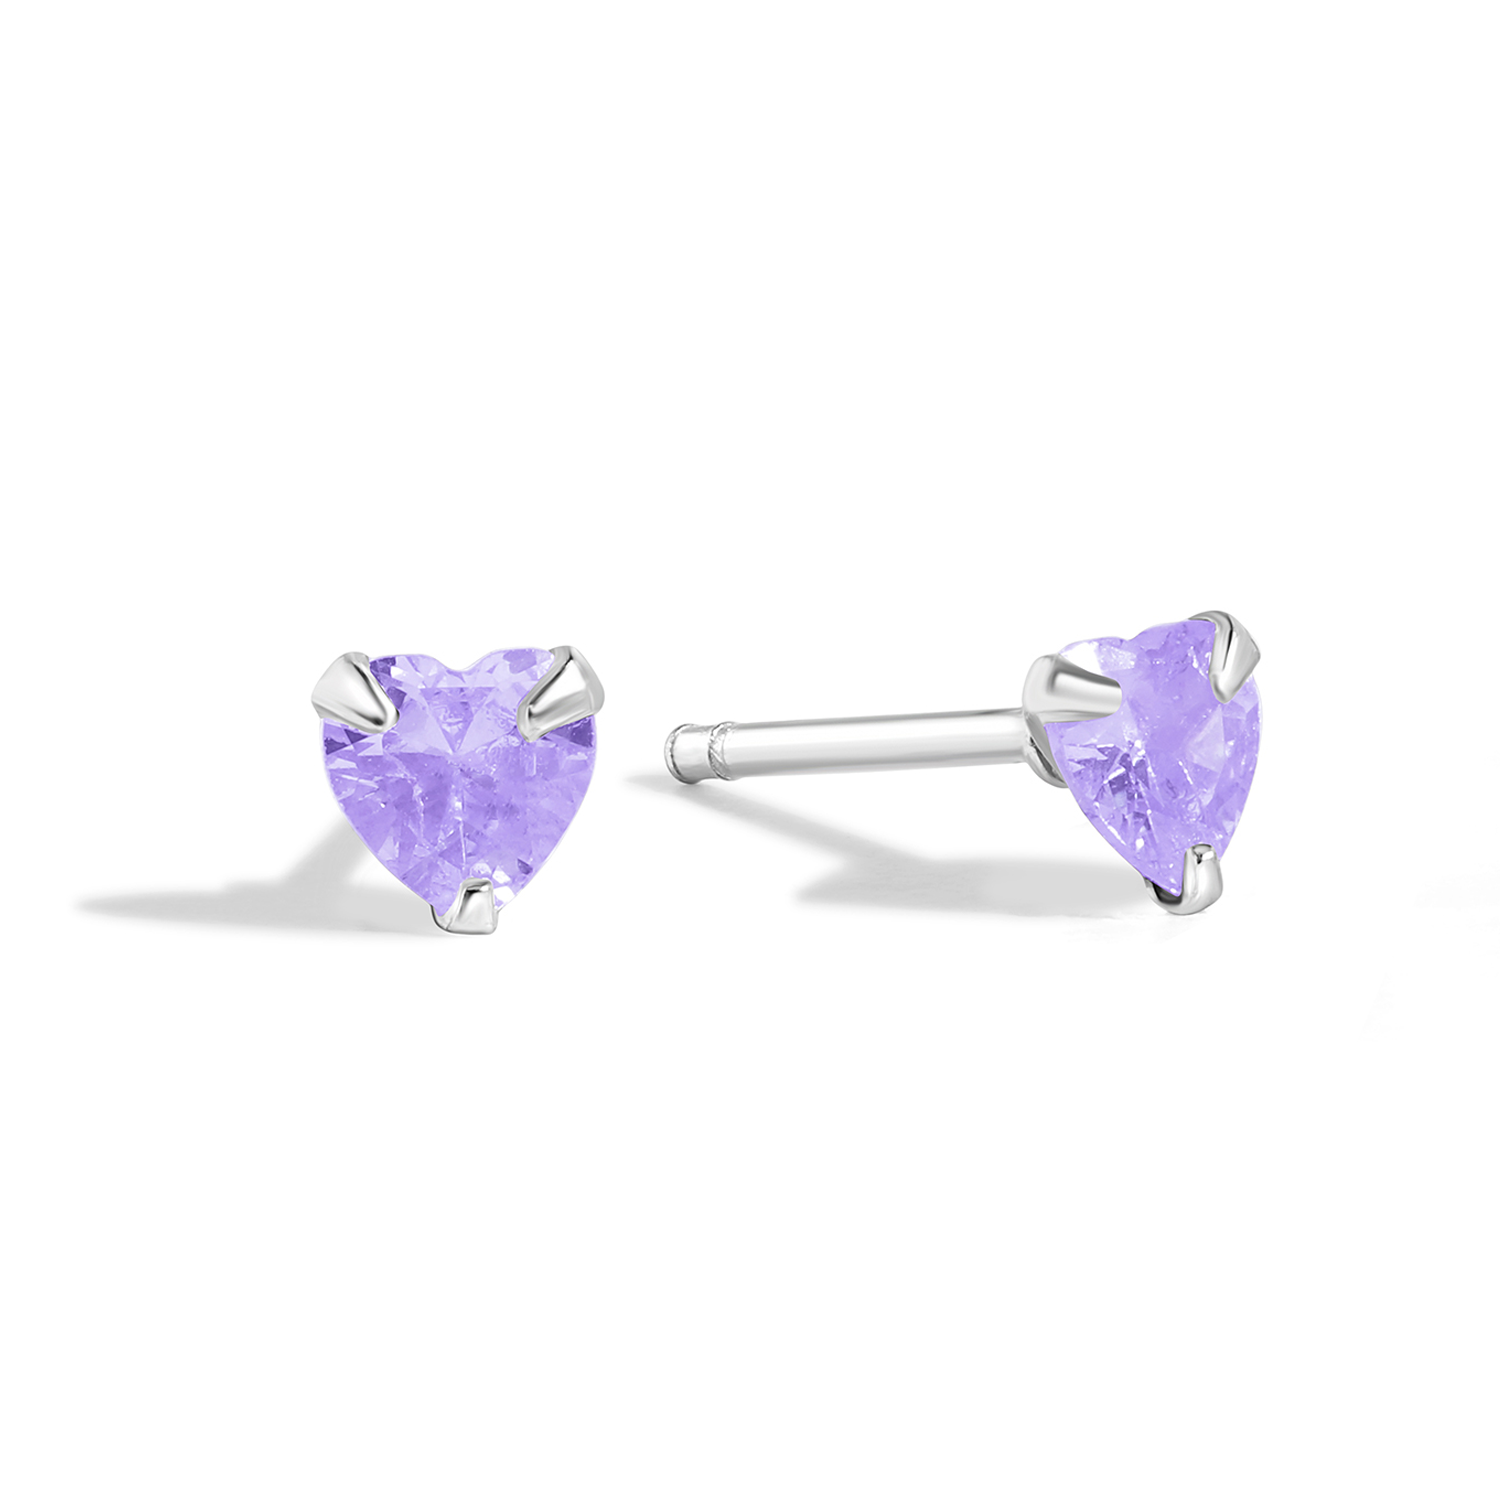 Delicate and dainty studs in 925 silver with purple cubic zirconia.